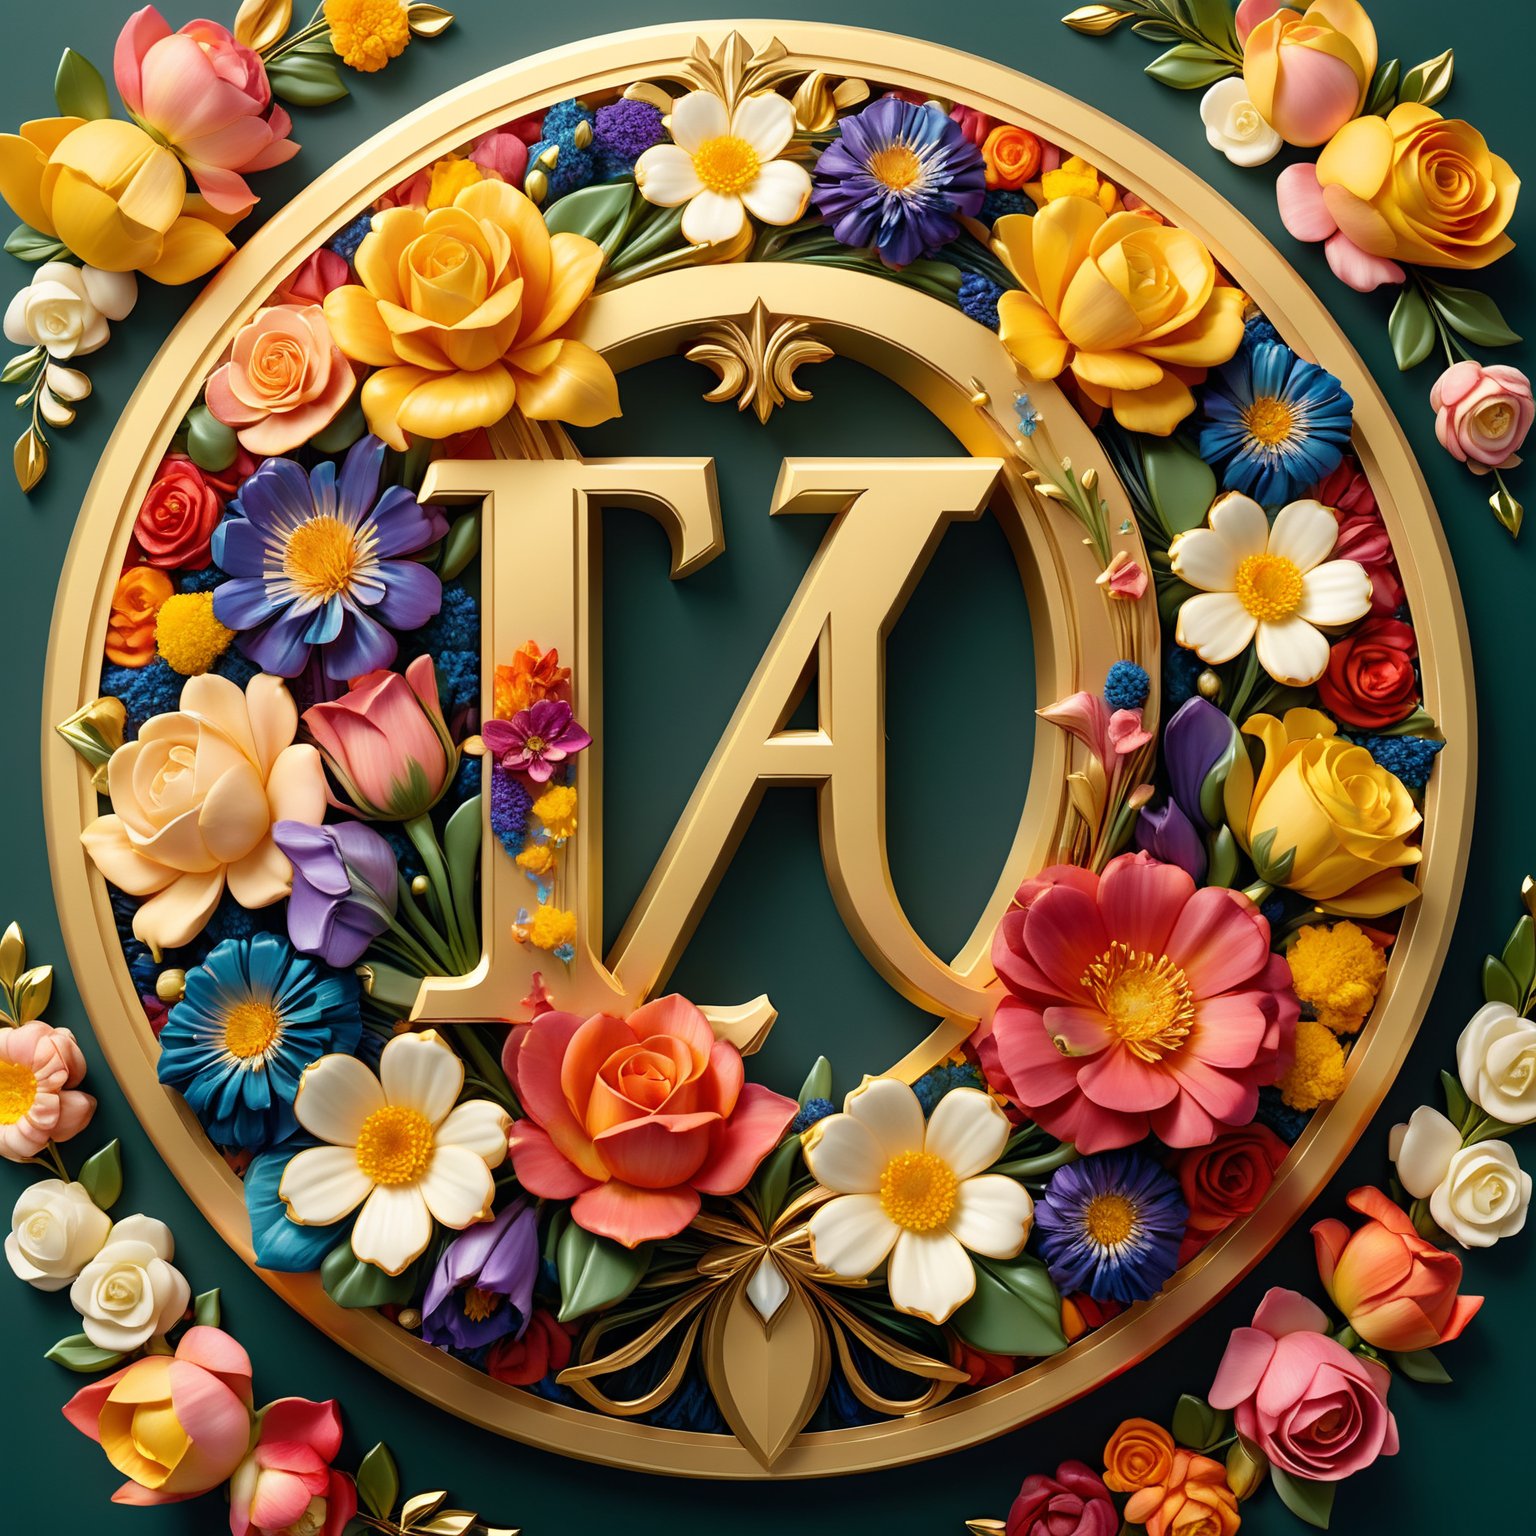 ((masterpiece)),High quality,visual stuning,
2.5d emblem design with the letter ("'TA"") in the center logo, and line of letters 1st Anniversary  below the emblem,flowers wrap around the badge,floating,colorful and readable.
A detailed and ornate badge featuring craftman and brush stroke,golden ratio,color harmony,centered